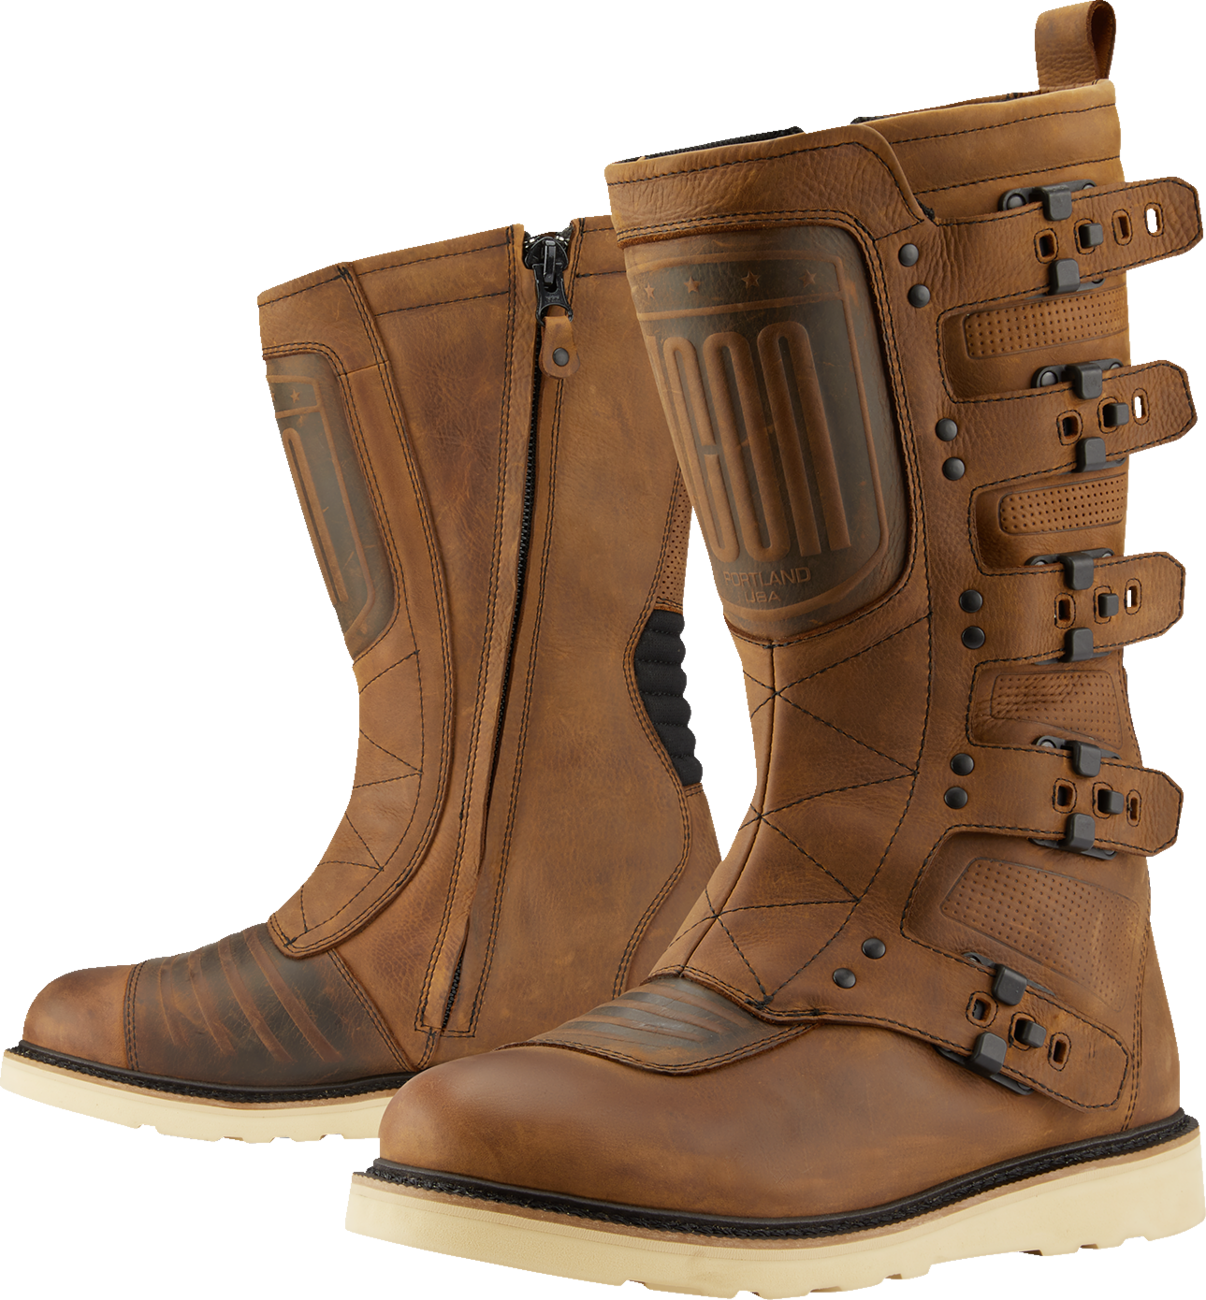 ICON Elsinore 2™ CE Boots - Brown - Size 9.5 3403-1224